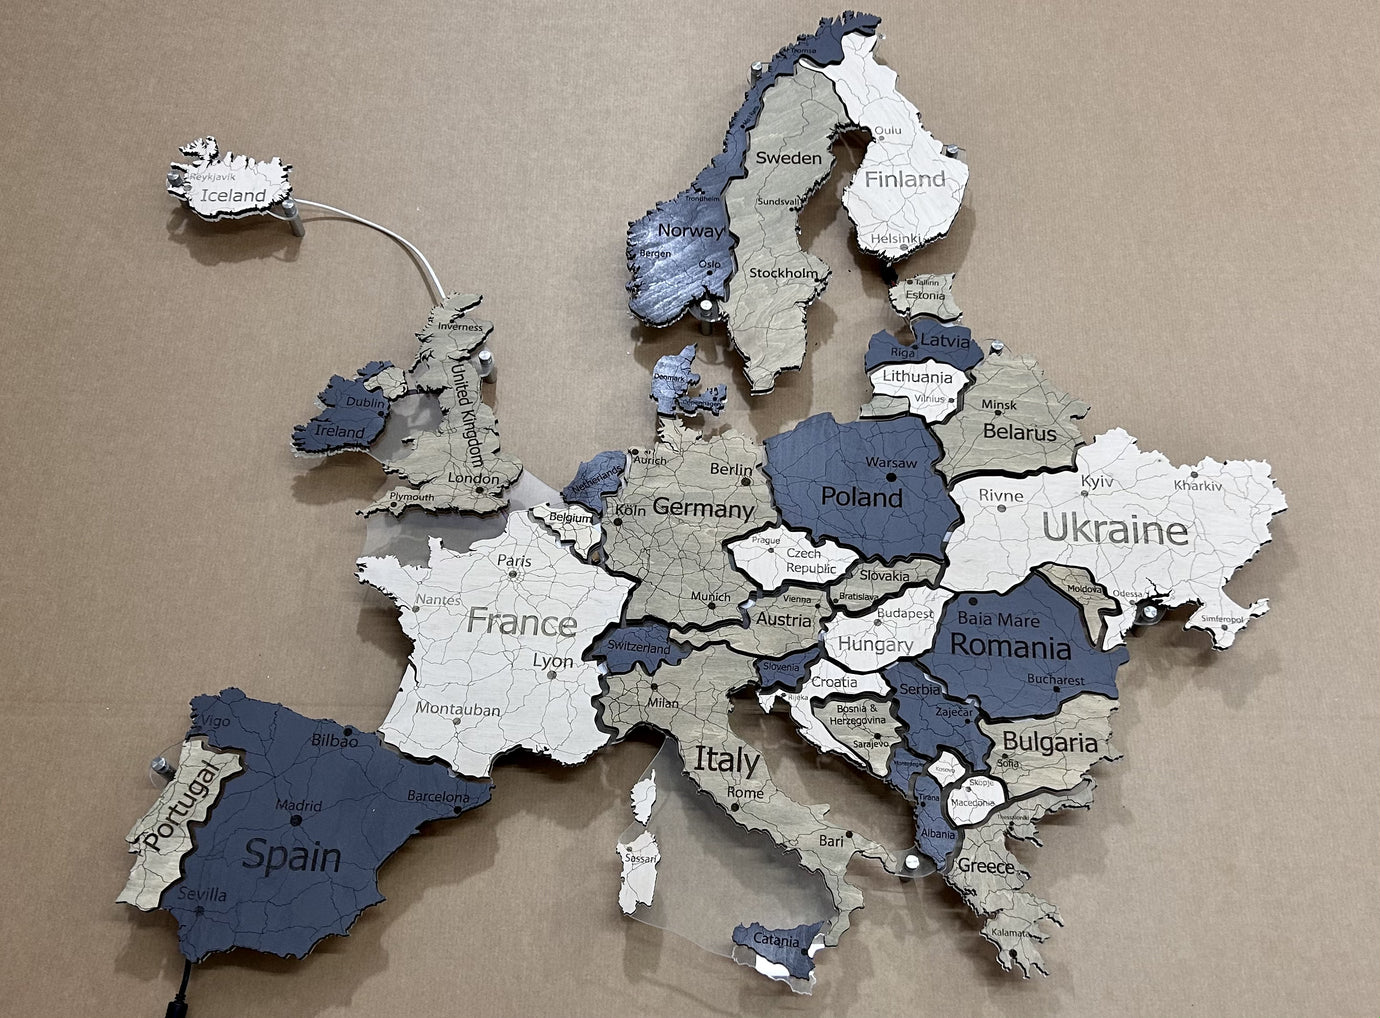 Europe LED map on acrylic glass with backlighting between countries color Deep